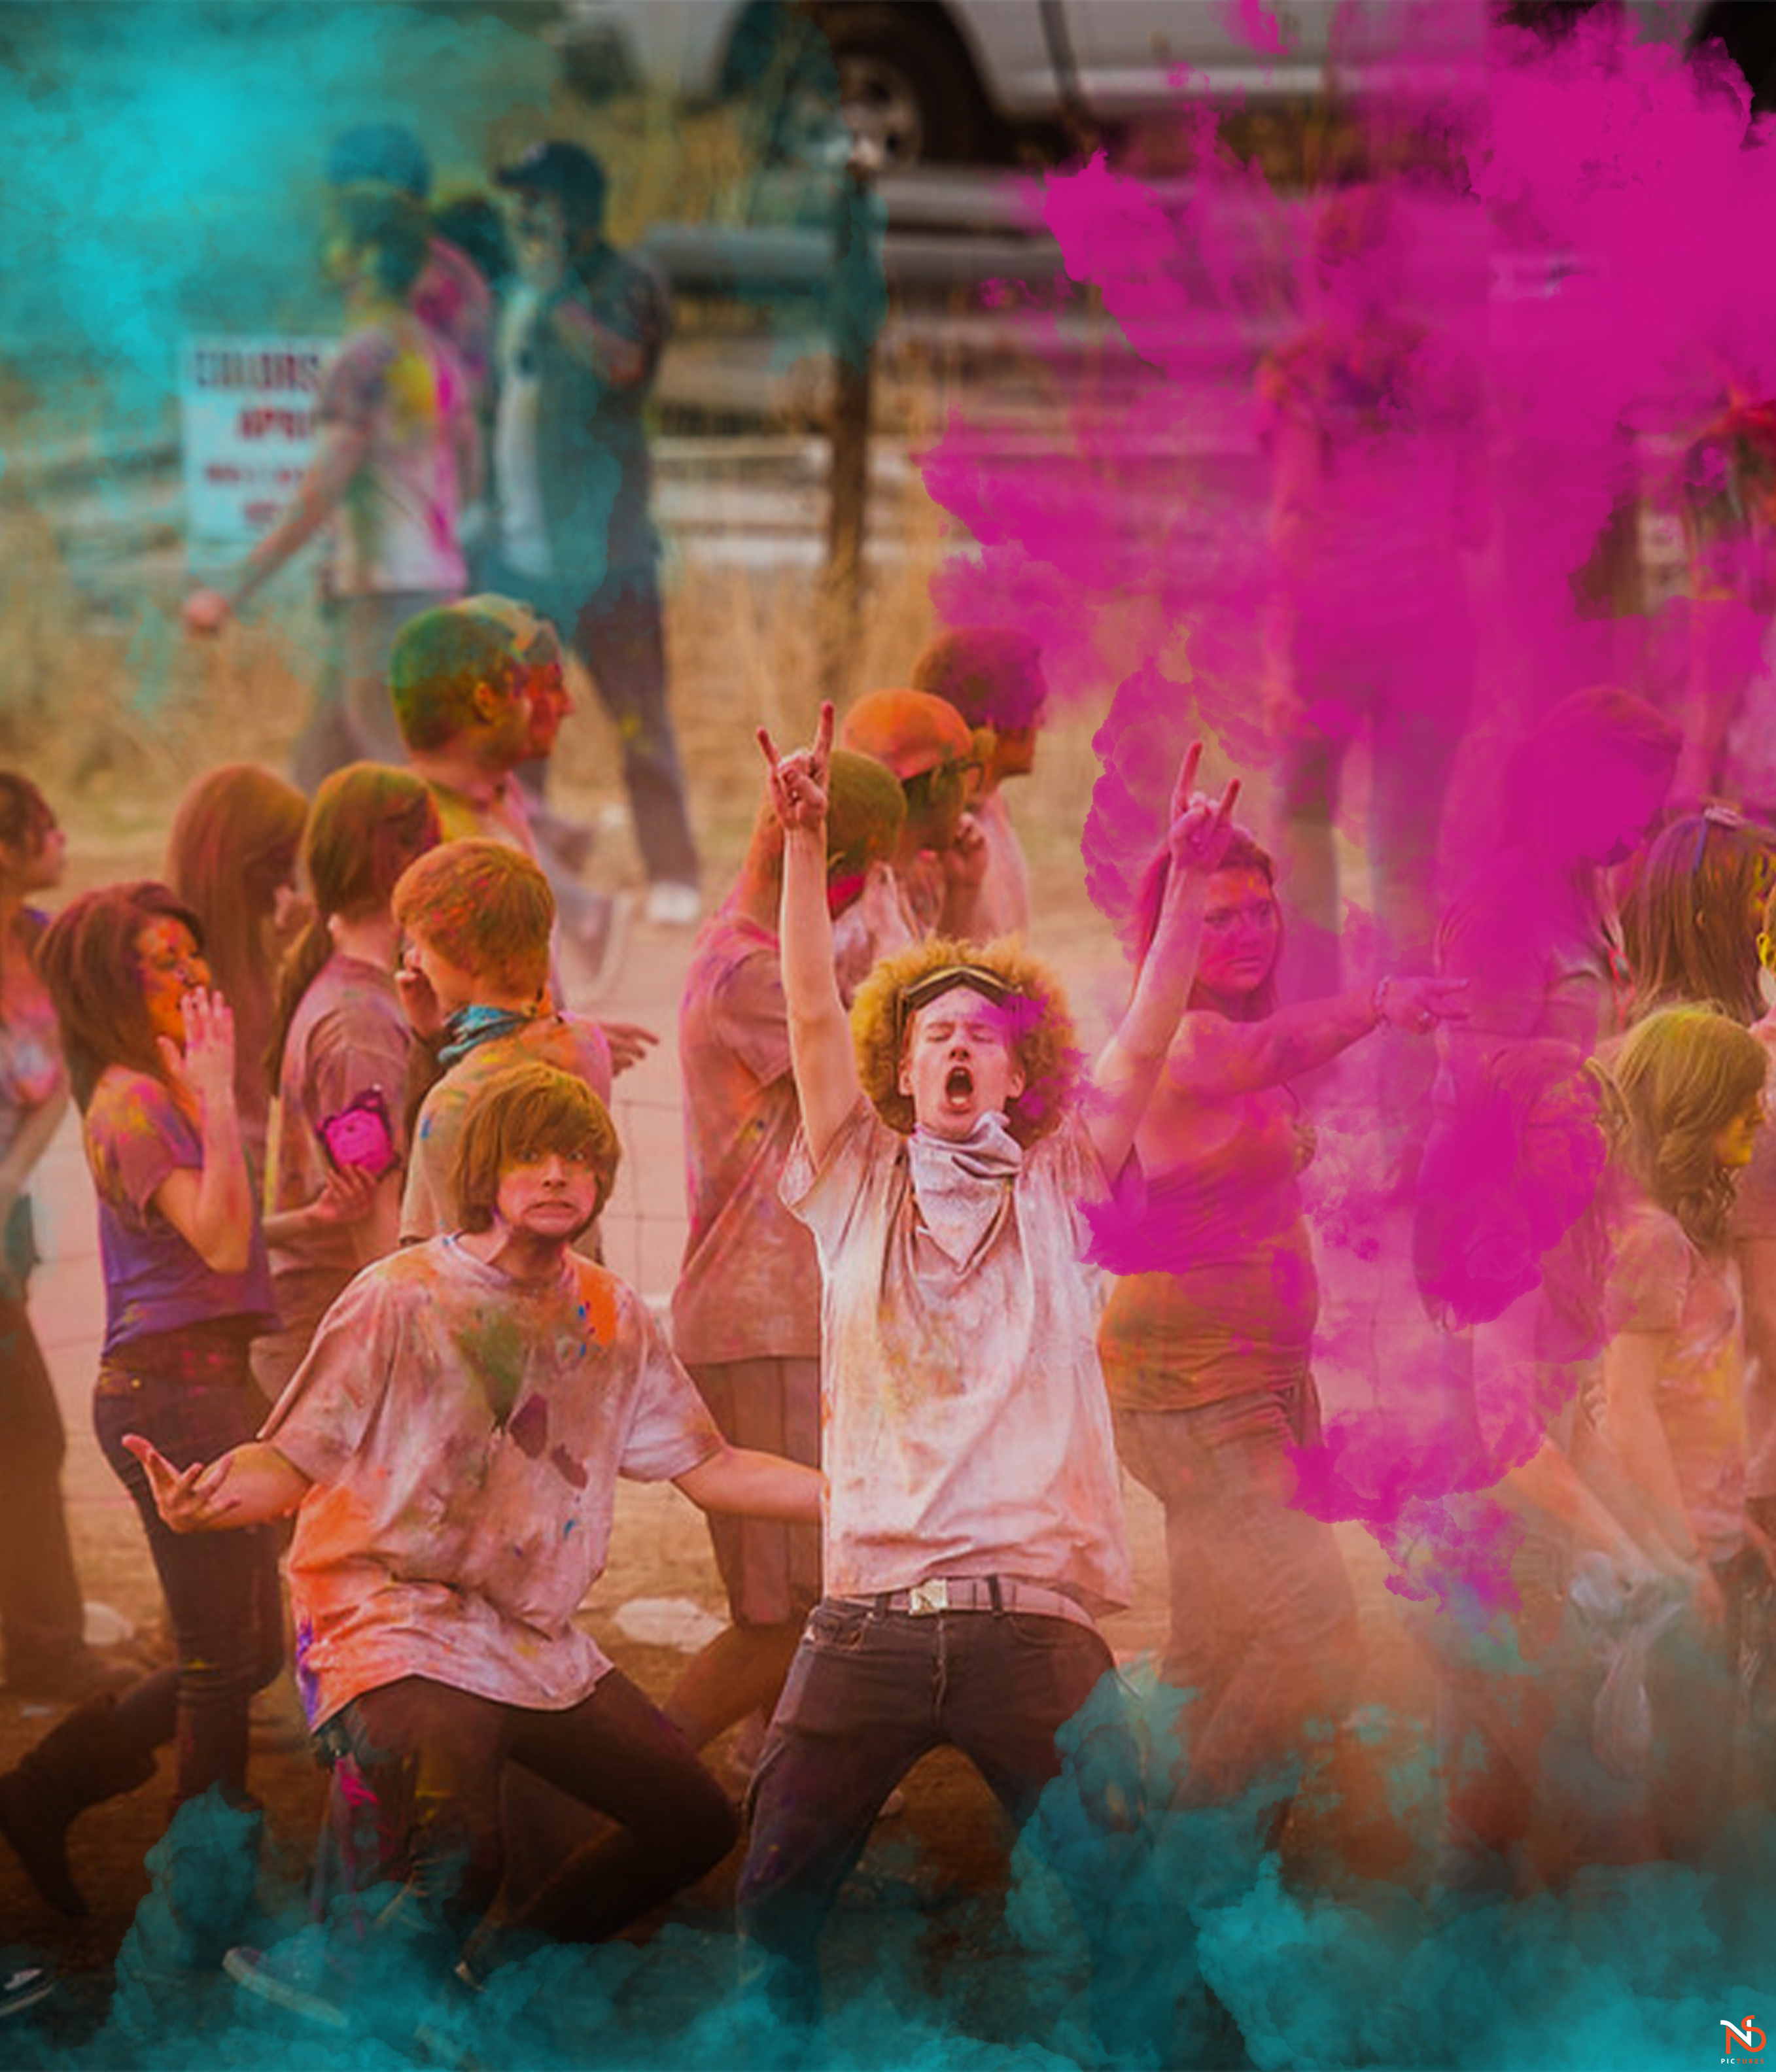 holi backgrounds download - holi HD editing backgrounds FREE Download